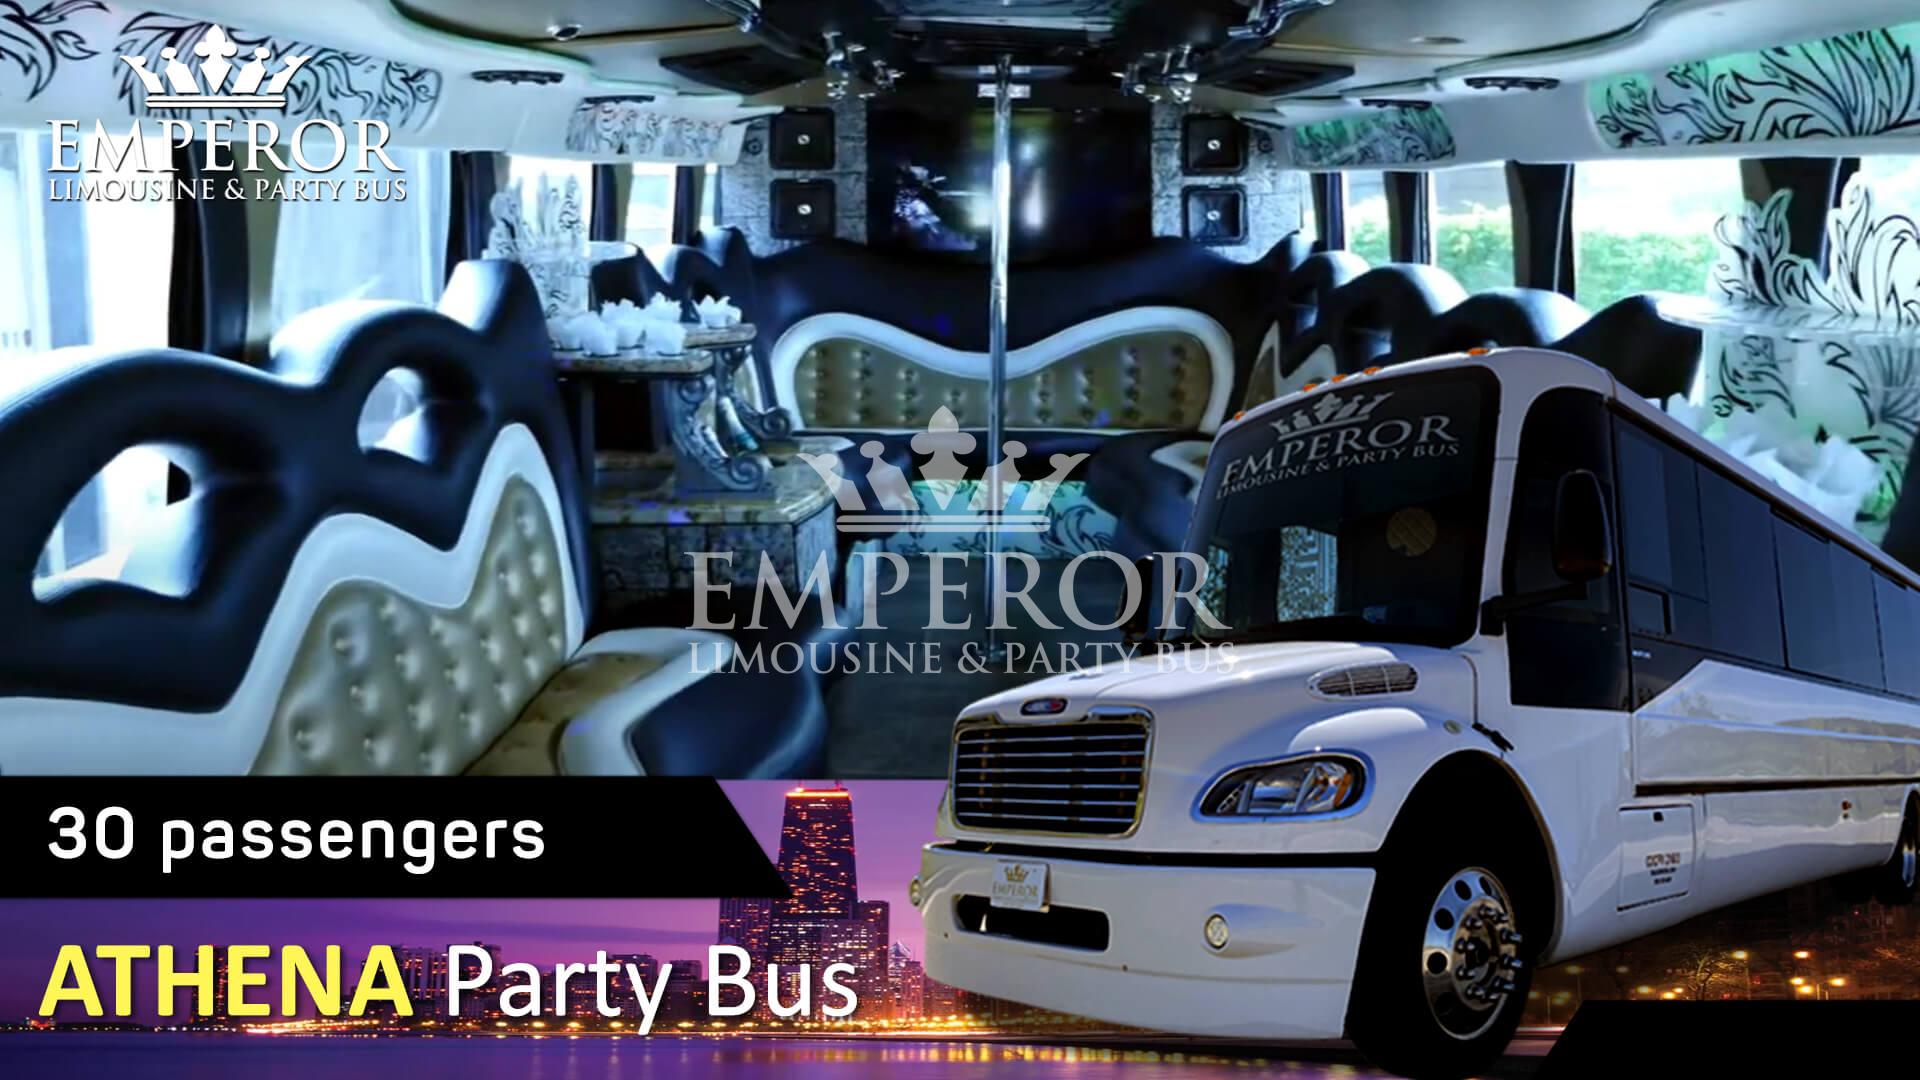 Party bus rental service in Algonquin - Athena Edition